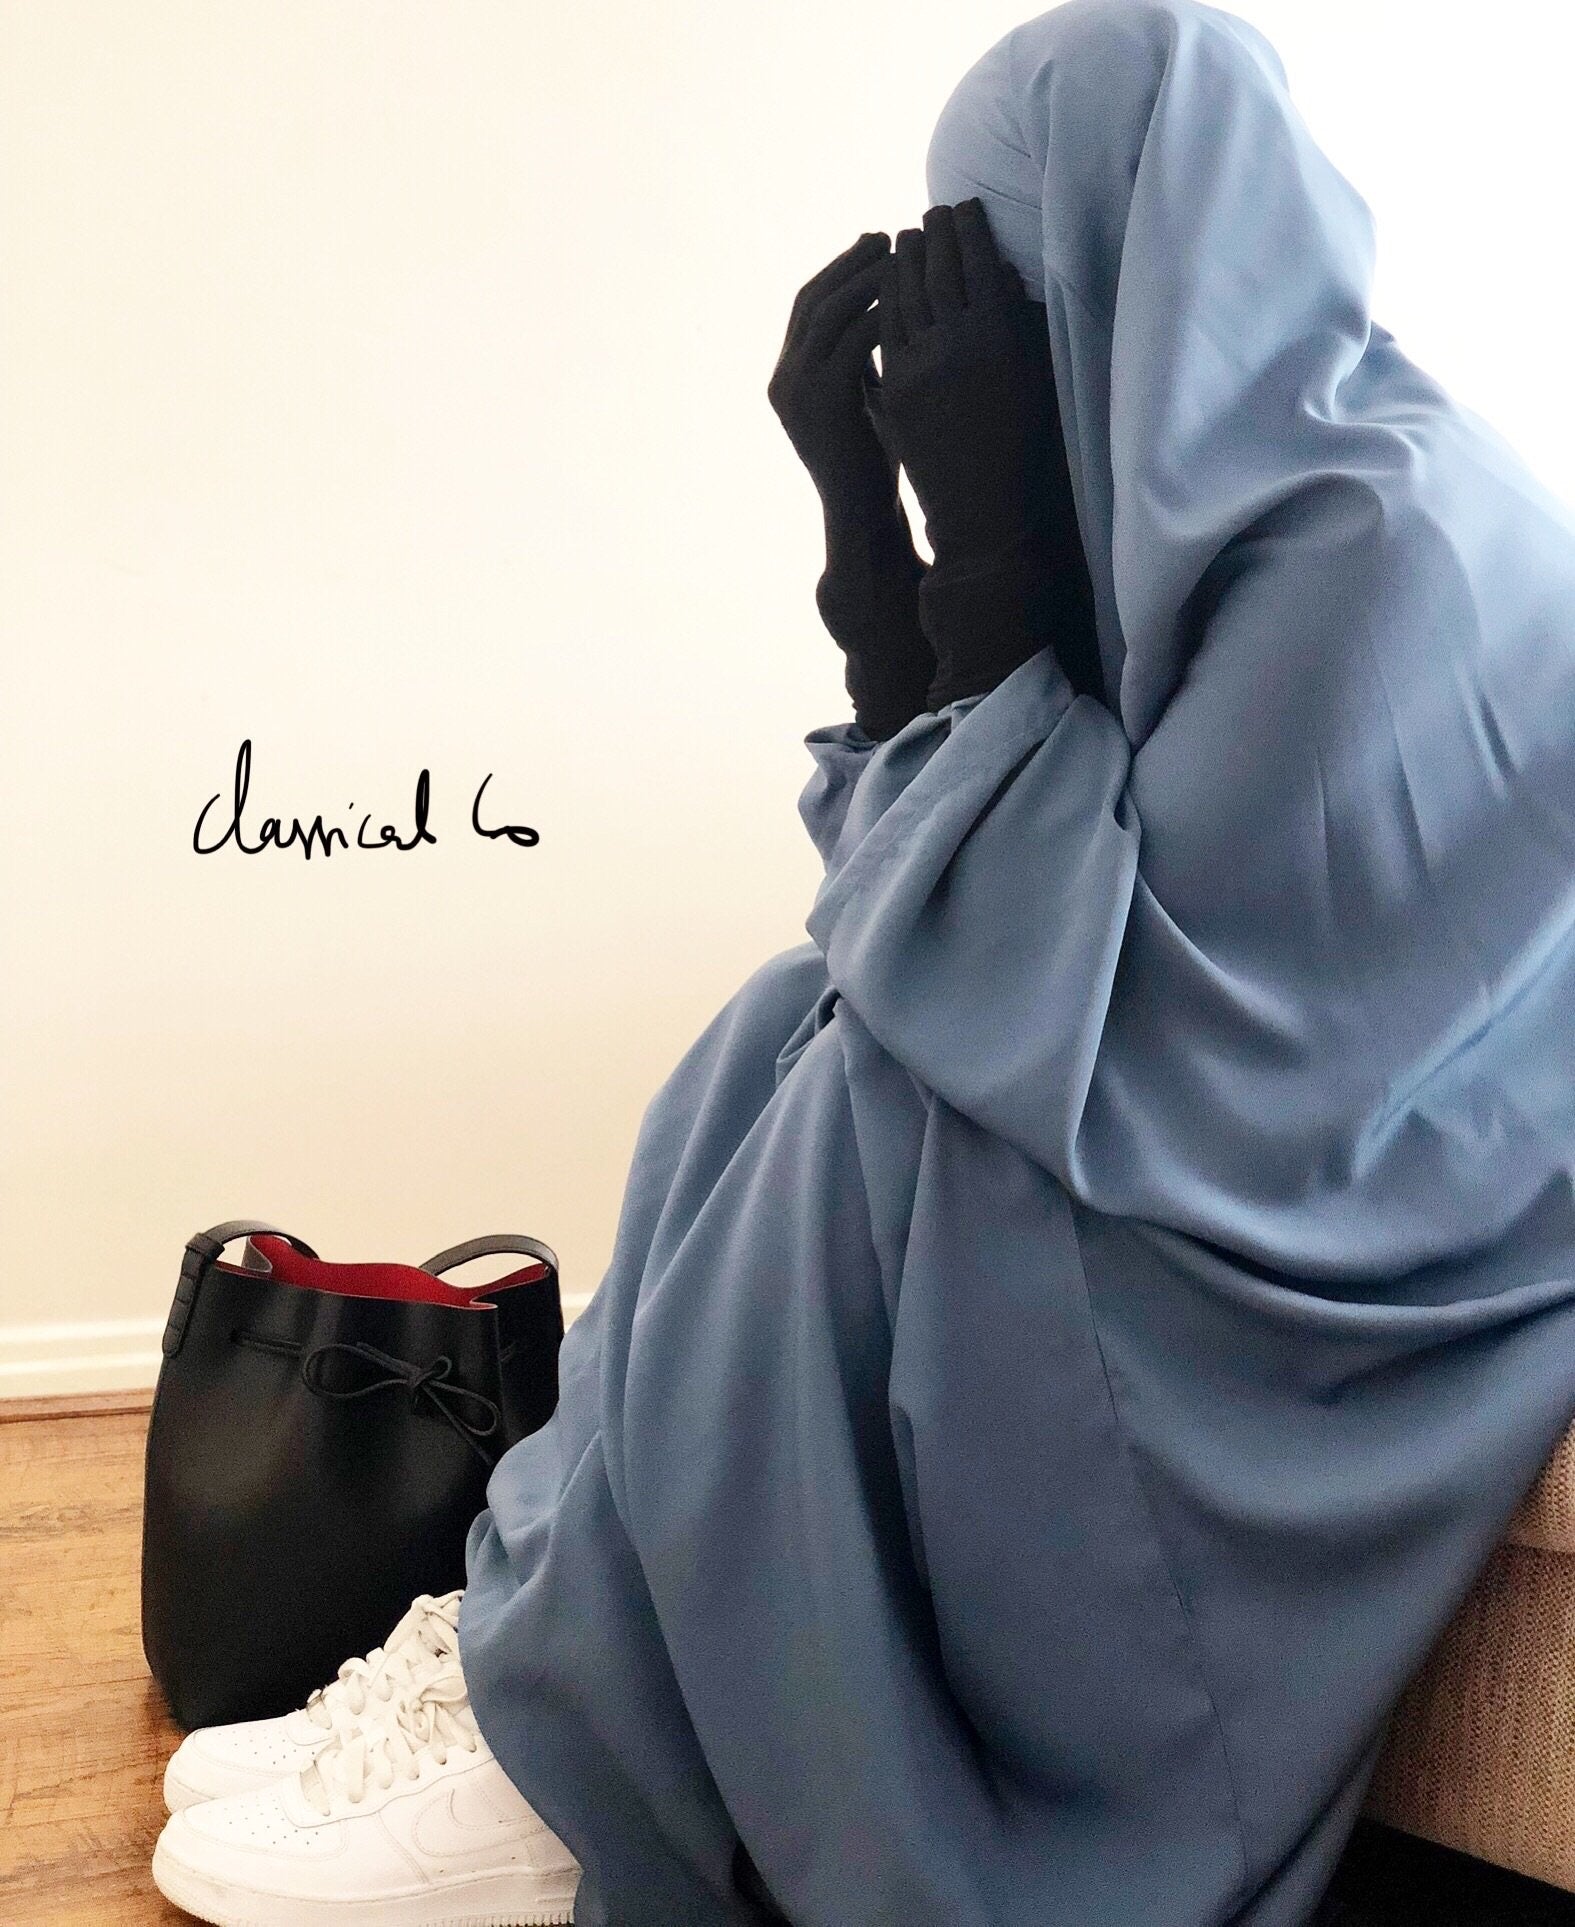 JILBAB CLASSICAL 2 PIECES SKIRT (all colours)